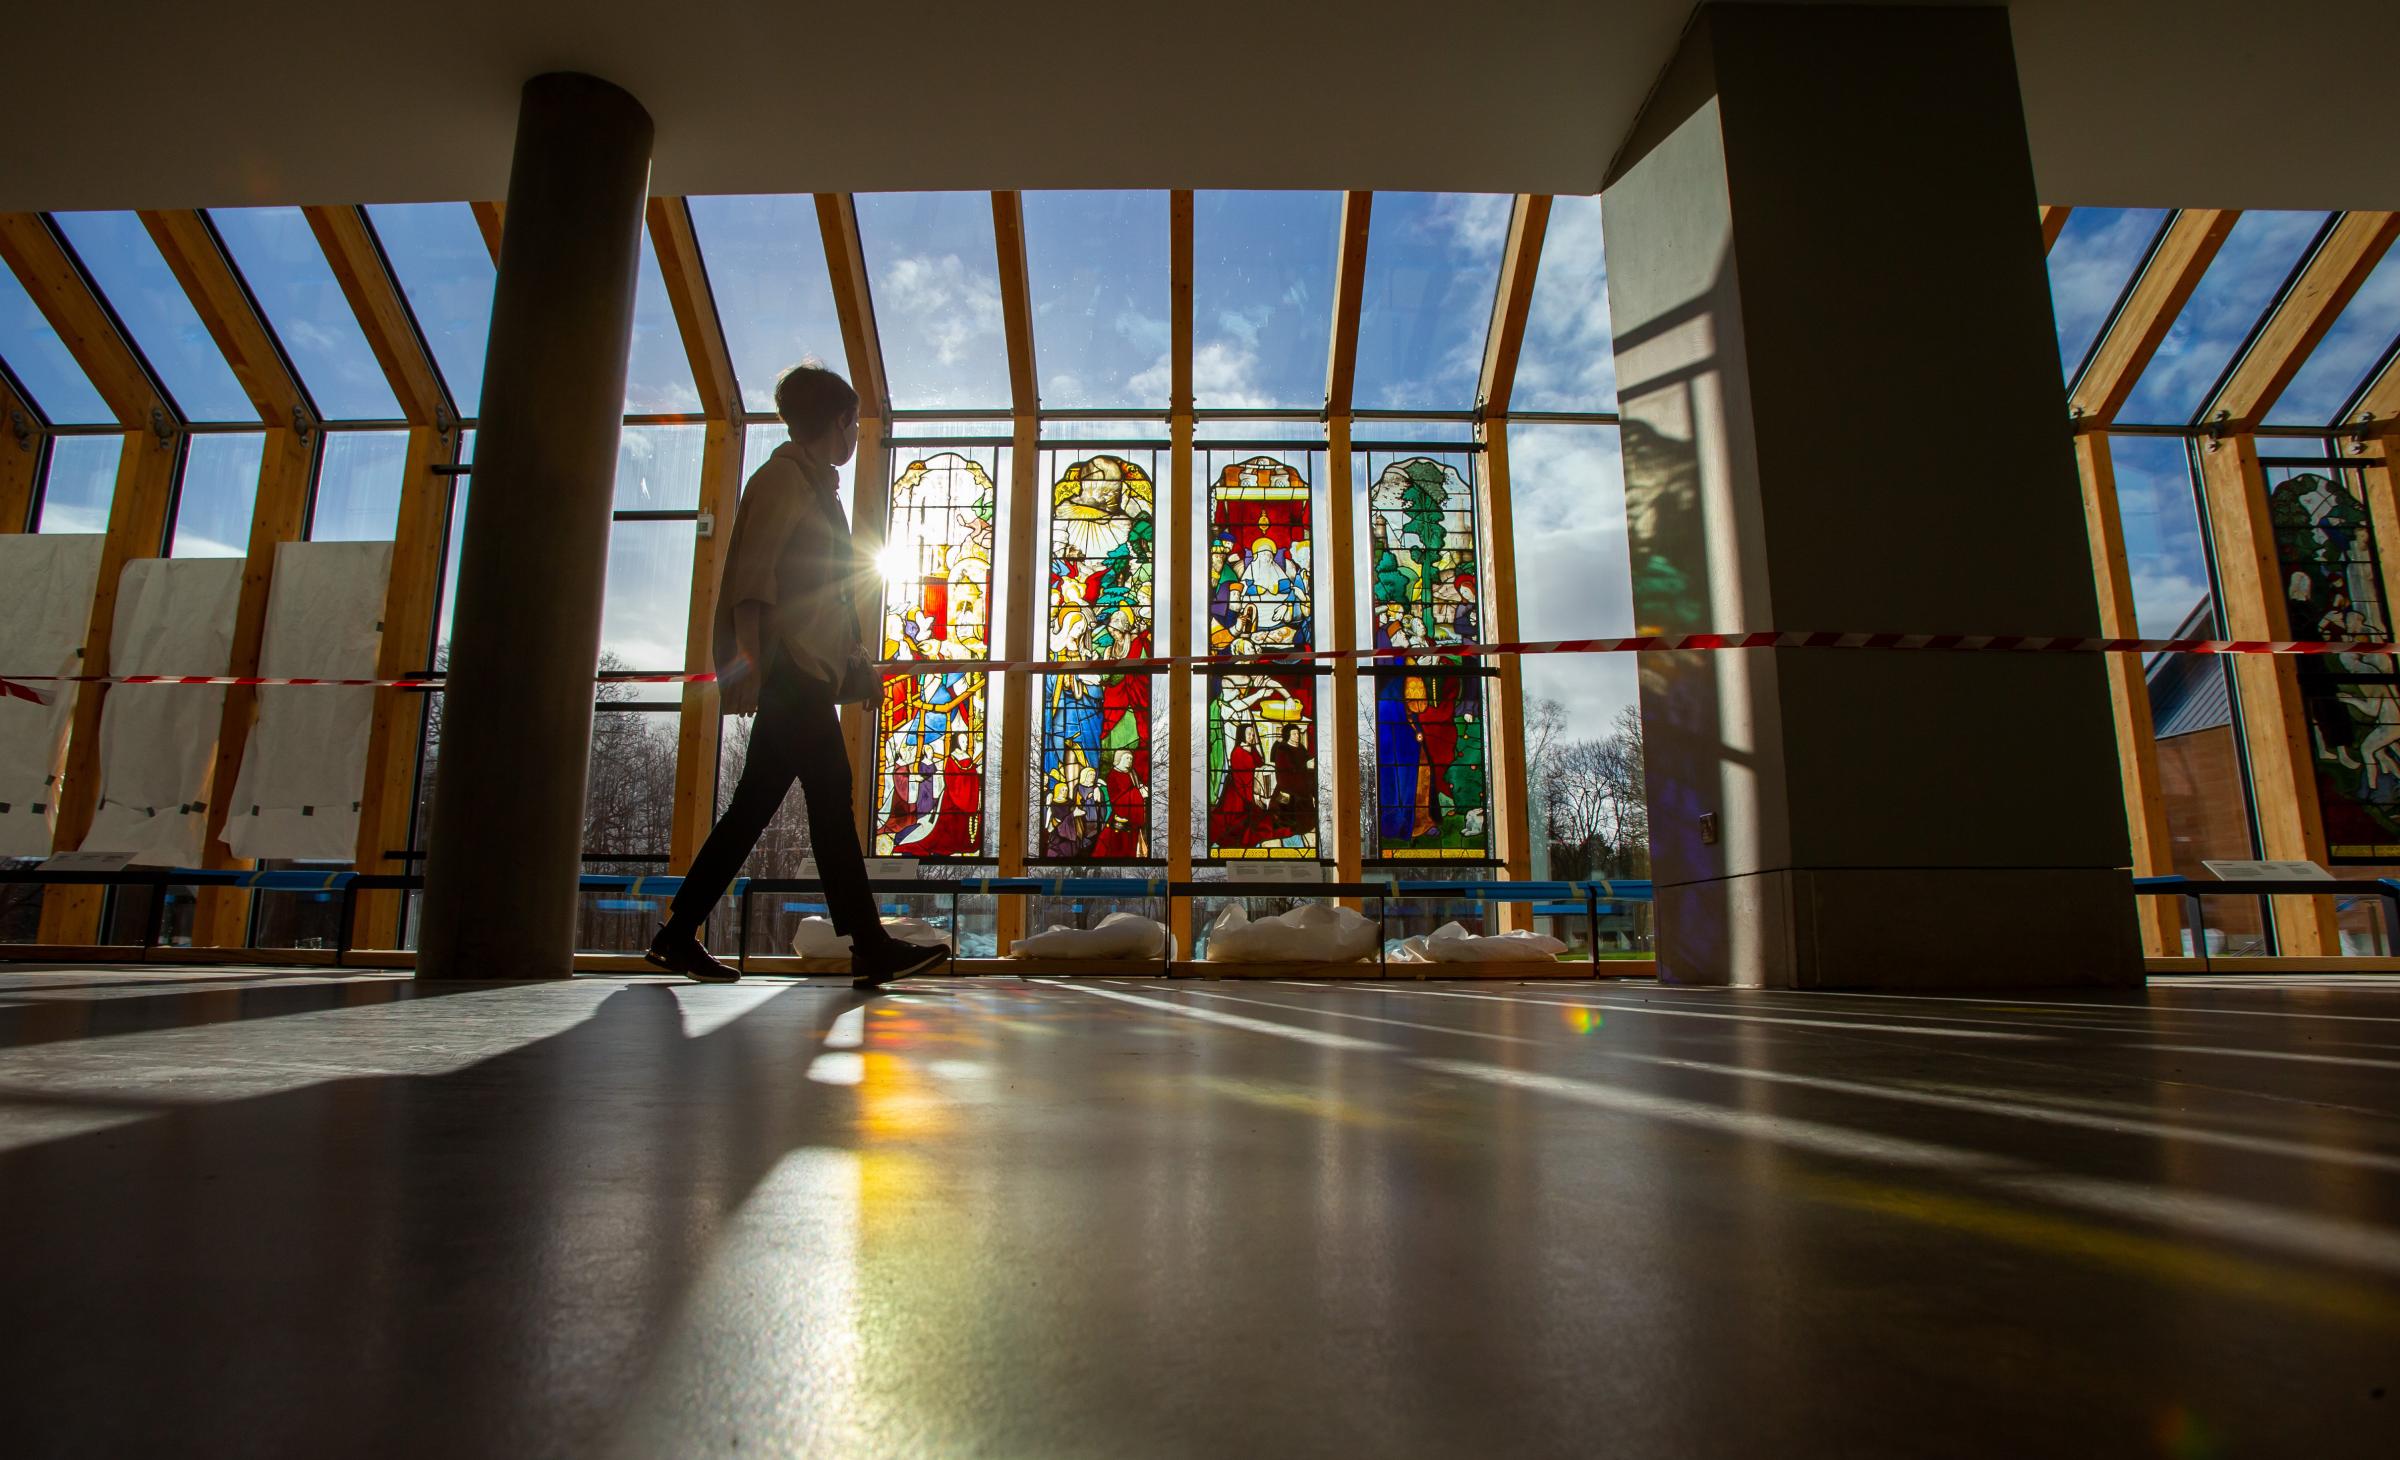 Burrell Collection is due to reopen its doors to the public on March 29 following a £69m revamp. Photograph by Colin Mearns.